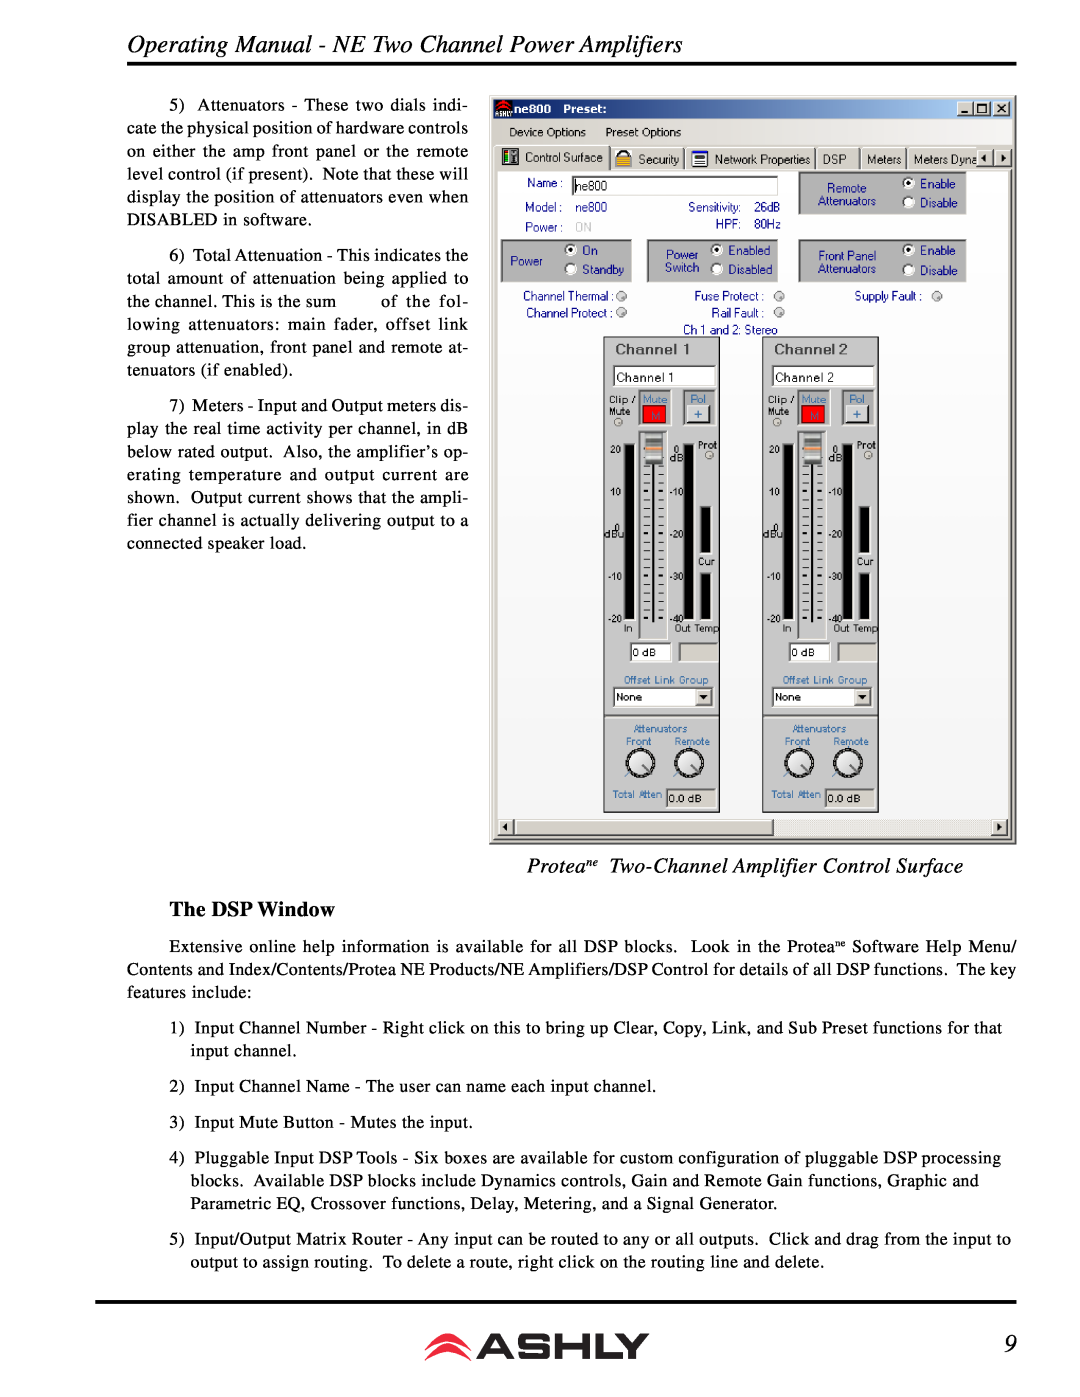 Ashly NE800 manual Proteane Two-ChannelAmplifier Control Surface, The DSP Window 